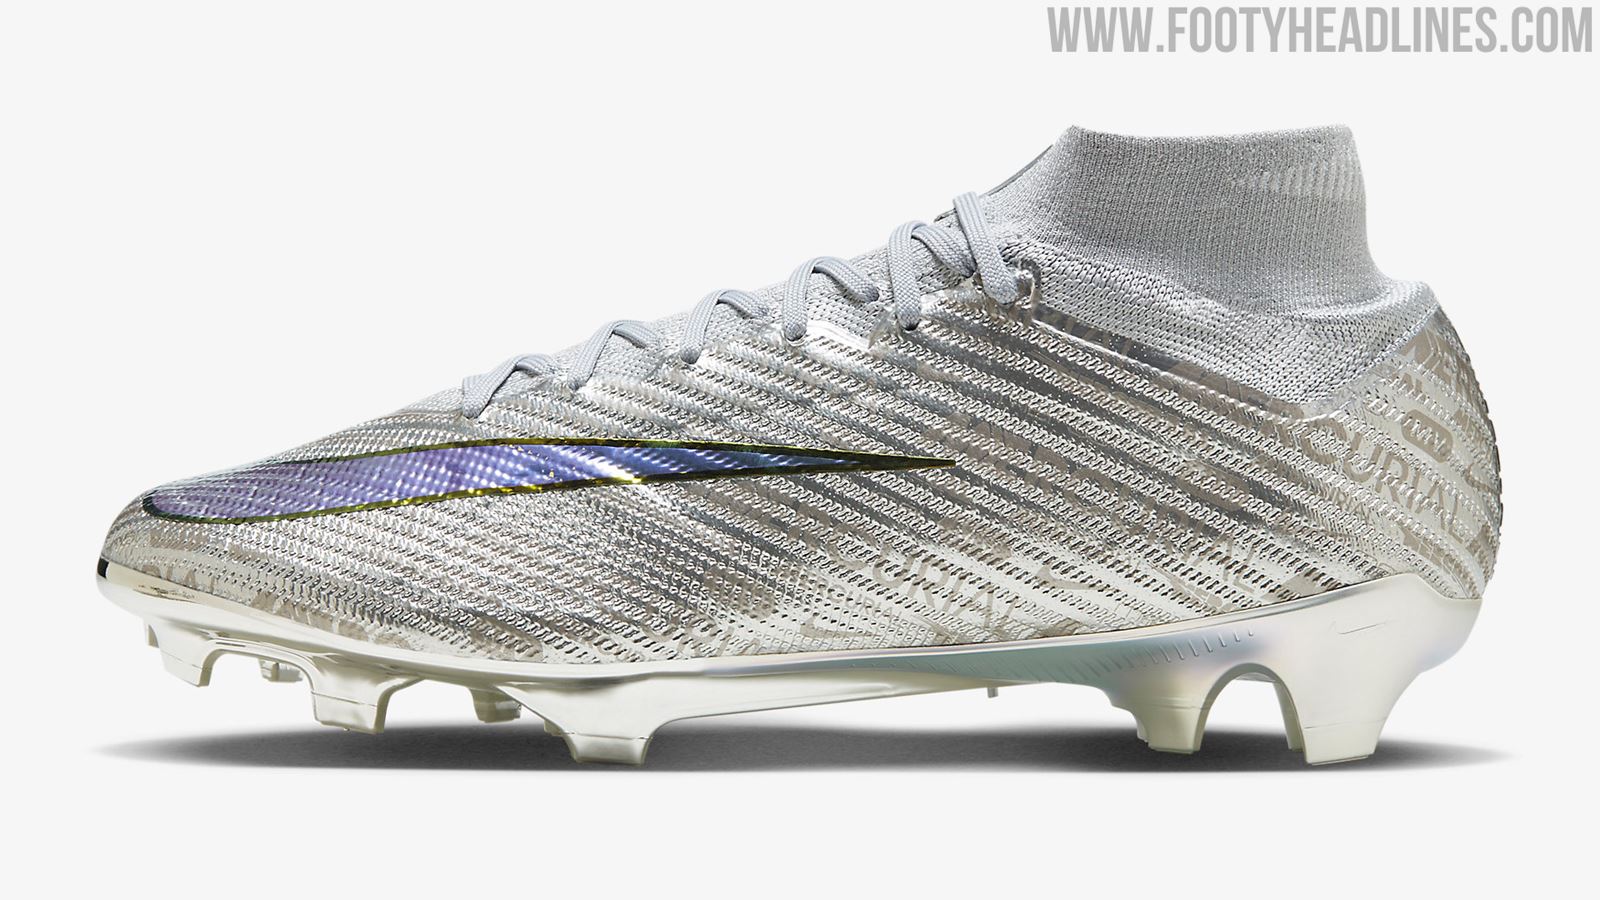 Trascendencia harto Creyente Spectacular Nike Mercurial Vapor & Superfly 'Disruption' 25 Years Limited- Edition Boots Released - Footy Headlines